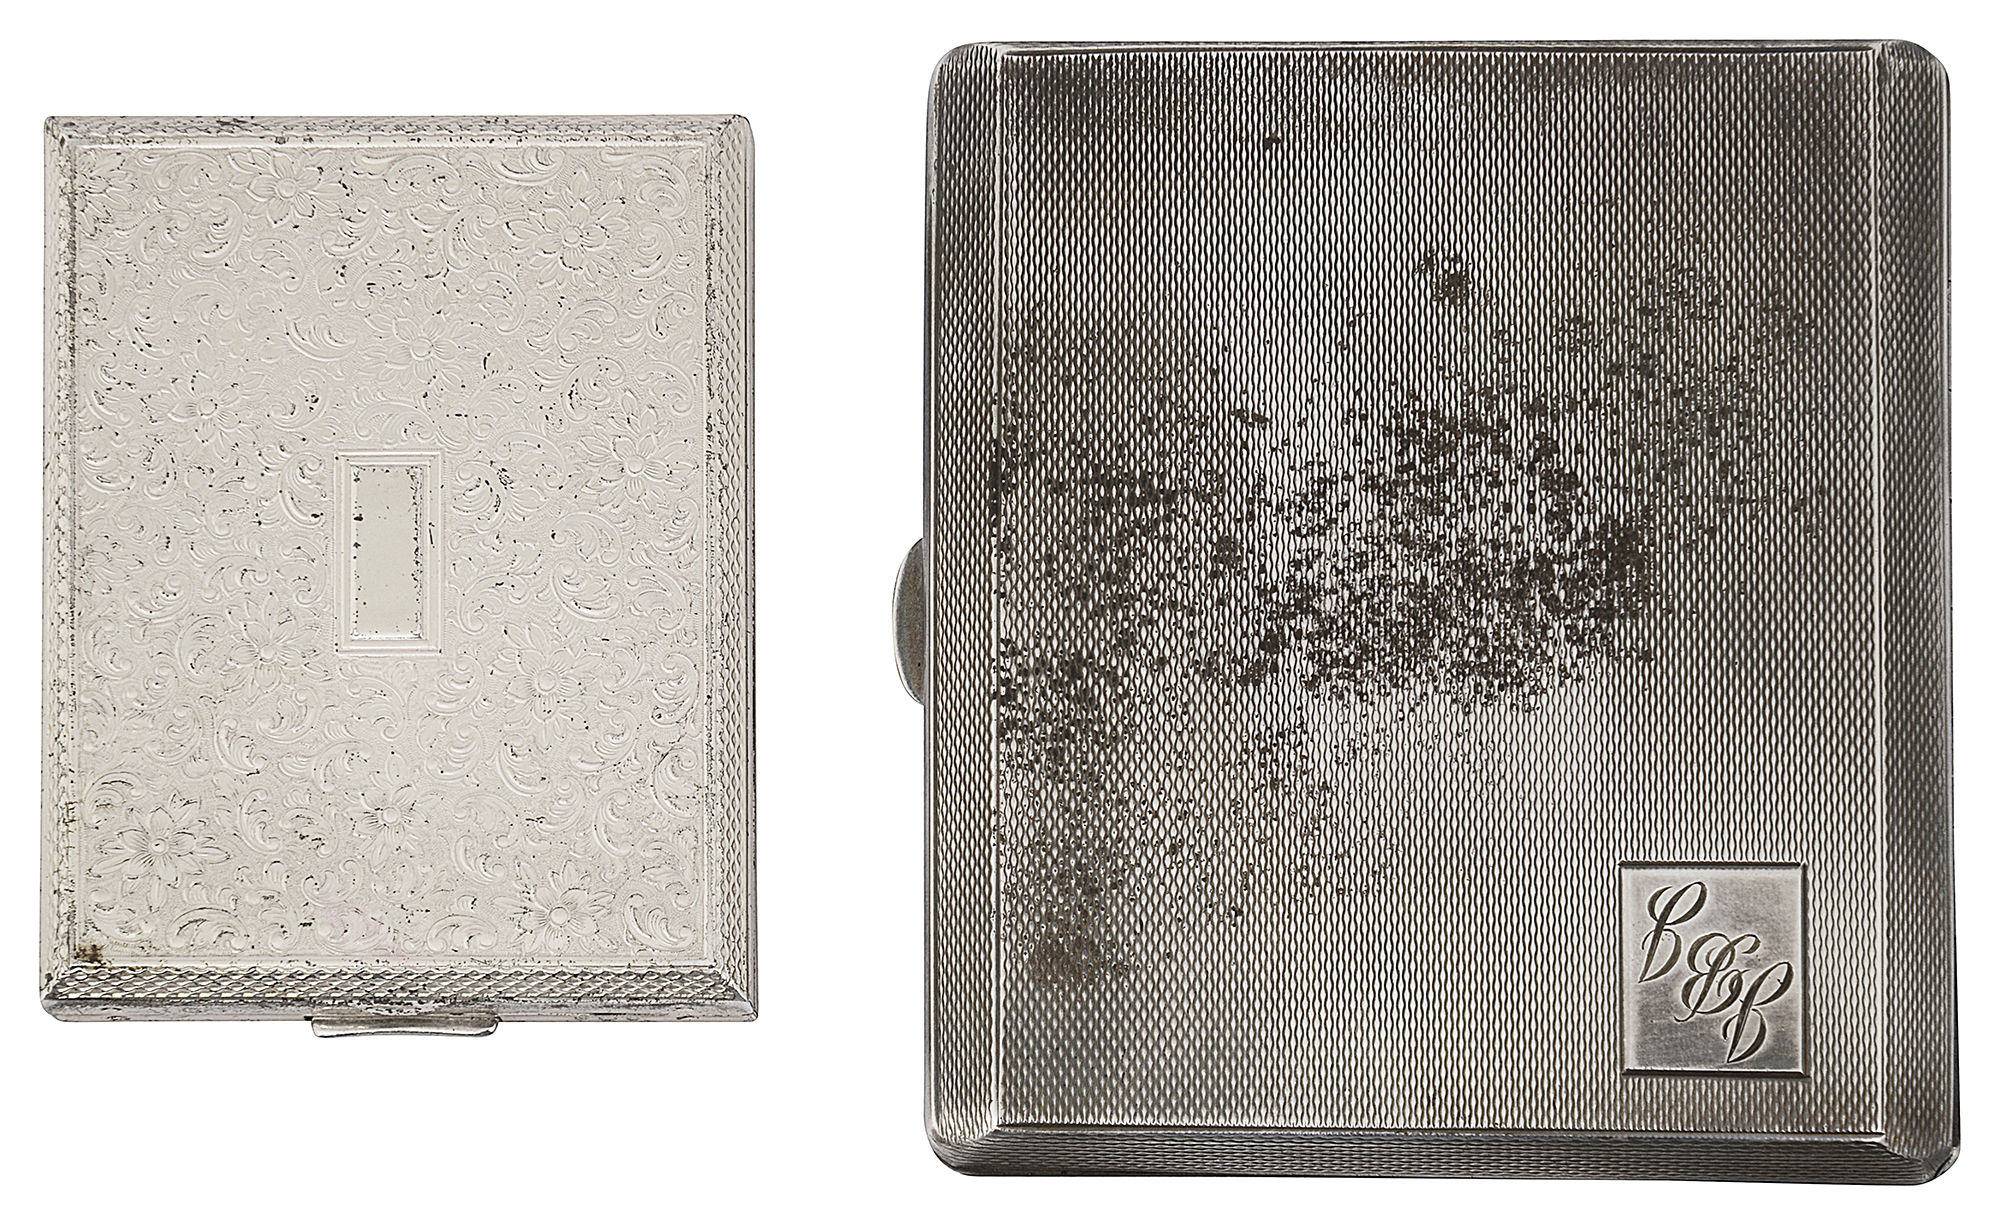 A silver Kigu lady's powder compact and an engine turned cigarette case